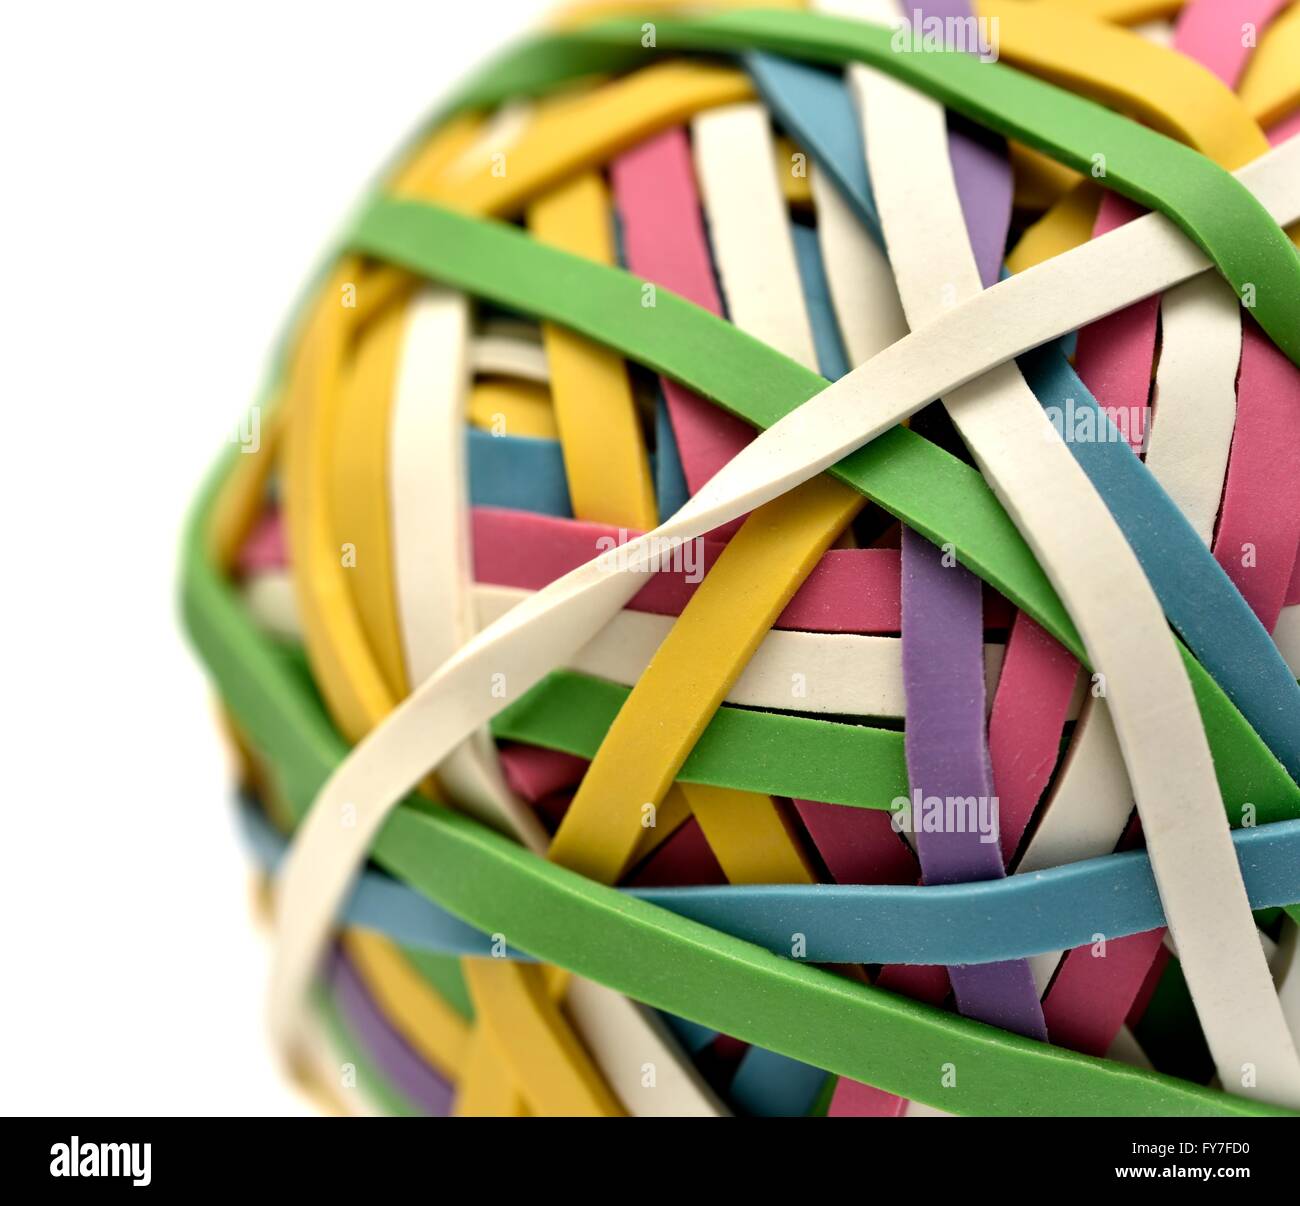 A rubber band ball Stock Photo